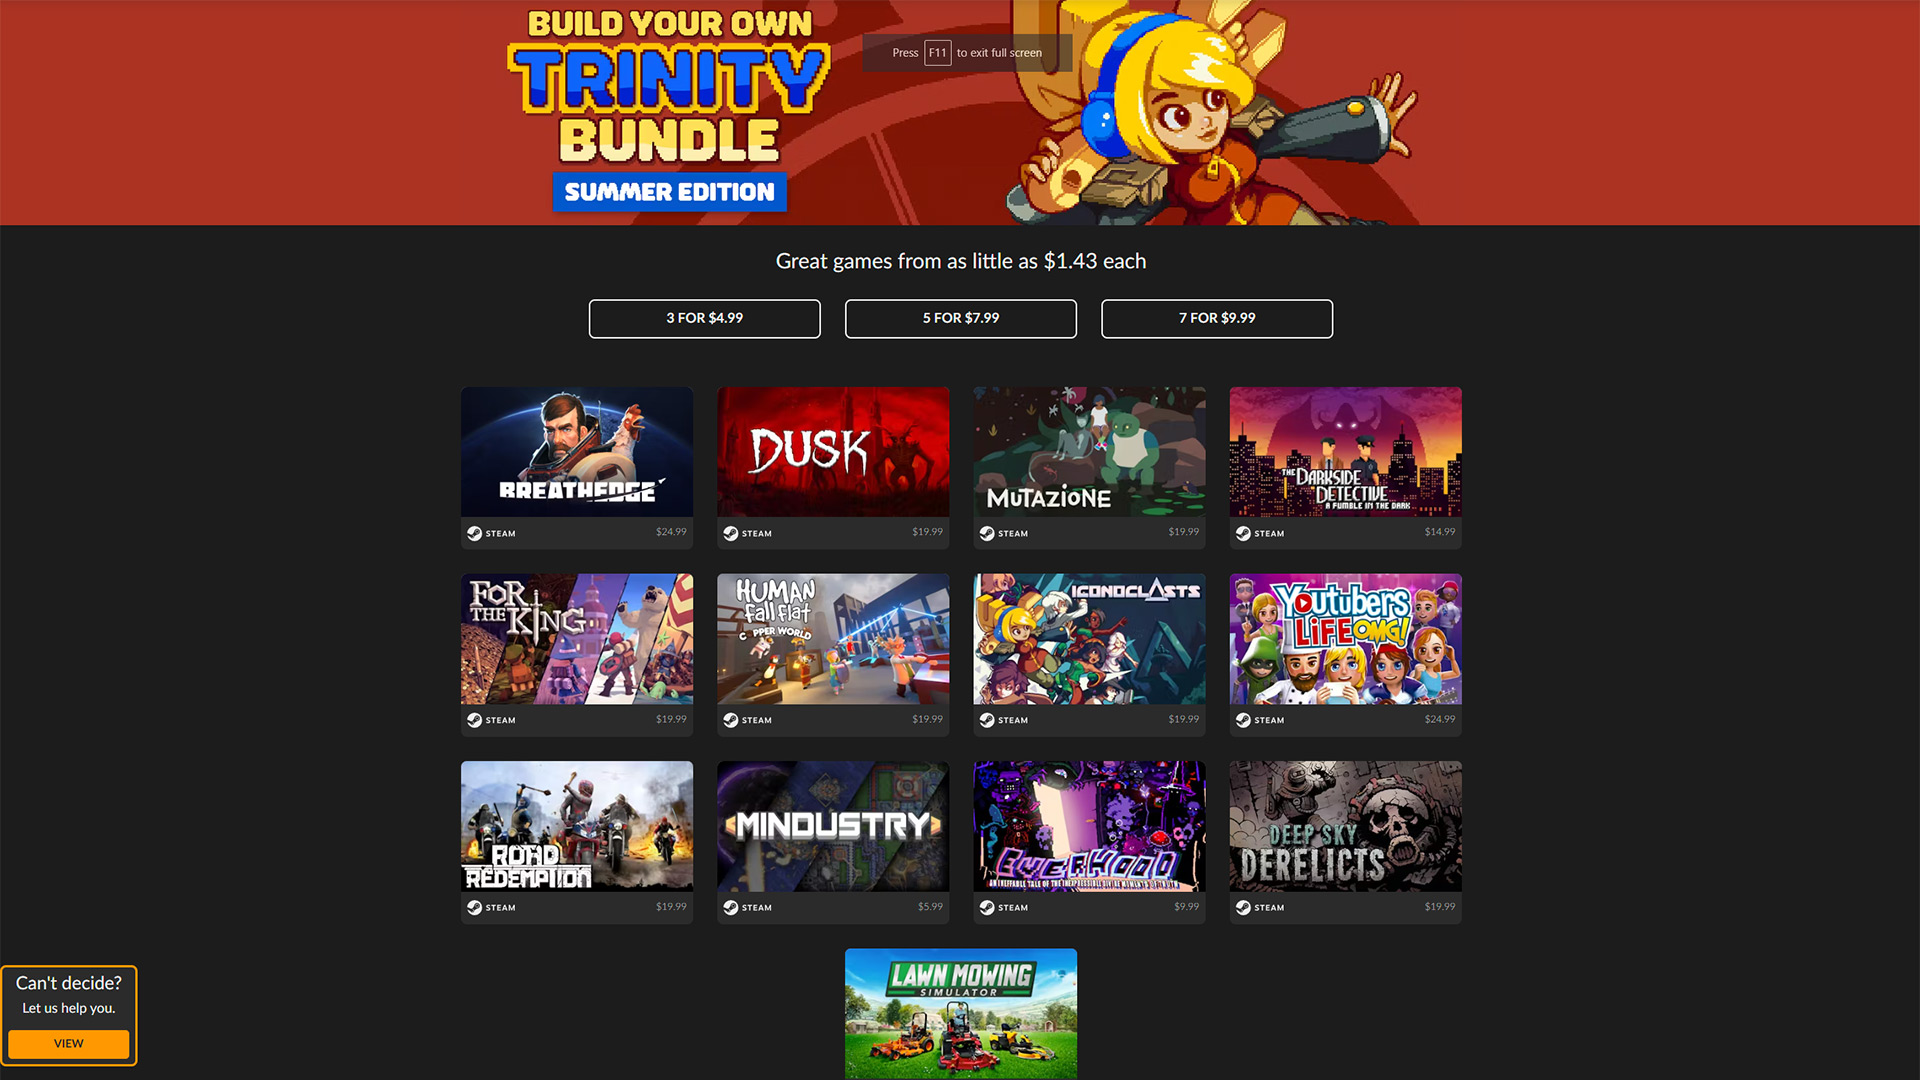 Fanatical's Build Your Own Trinity Bundle Summer Edition gets you 7 games for $9.99